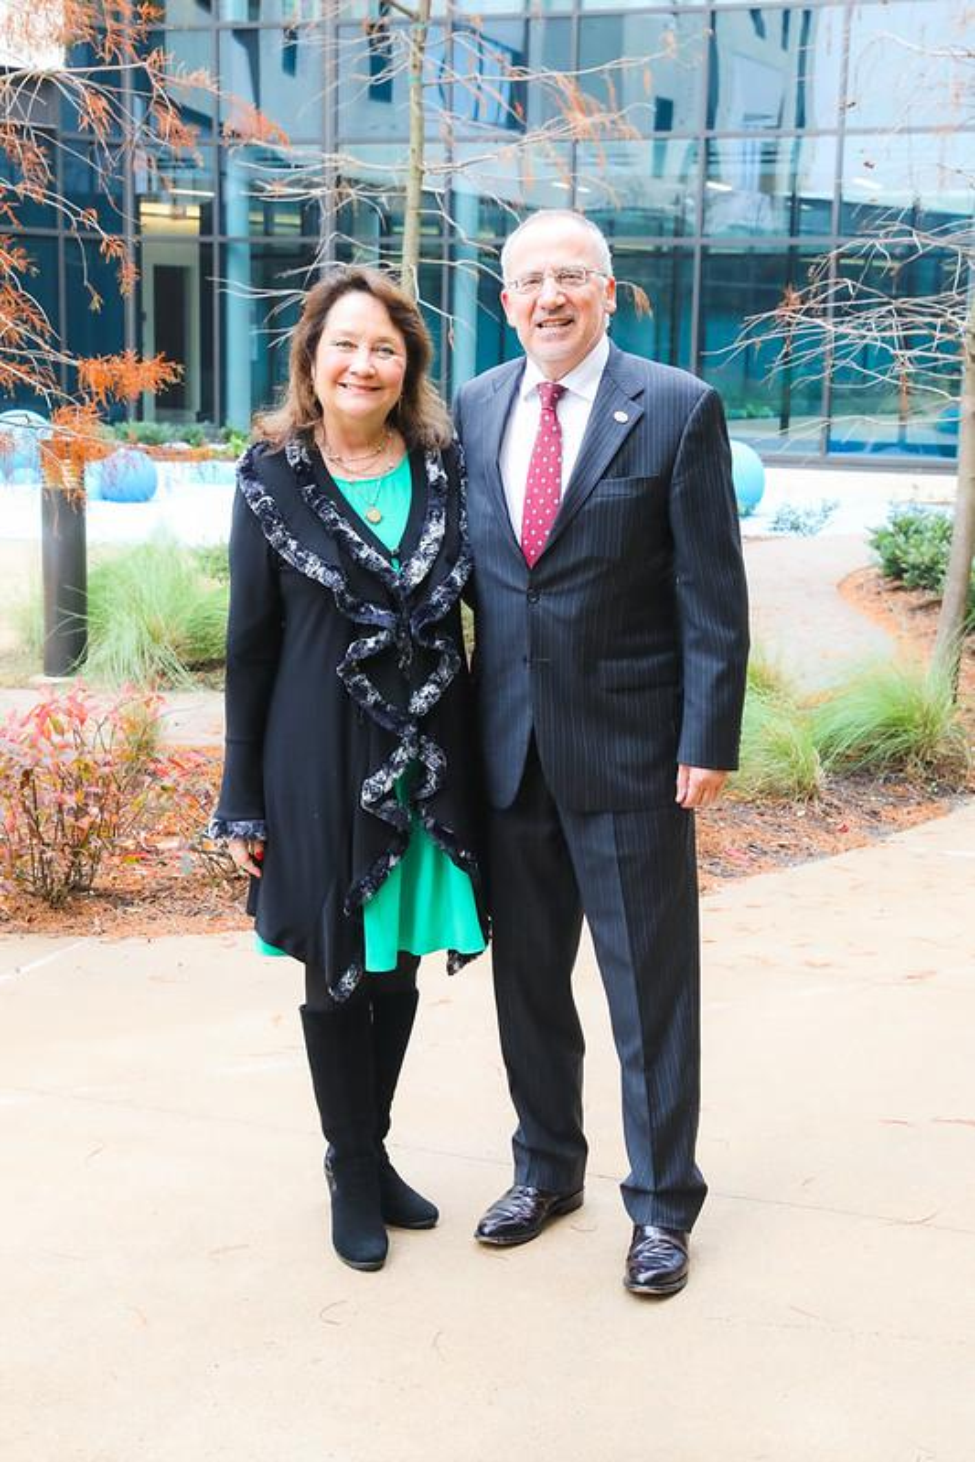 Texas First Lady Cecilia Abbott and UTHealth Houston President Giuseppe Colasurdo, MD, tour the John S. Dunn Behavioral Sciences Center, which was opened a year ago with strong legislative support. (Photo by UTHealth Houston).